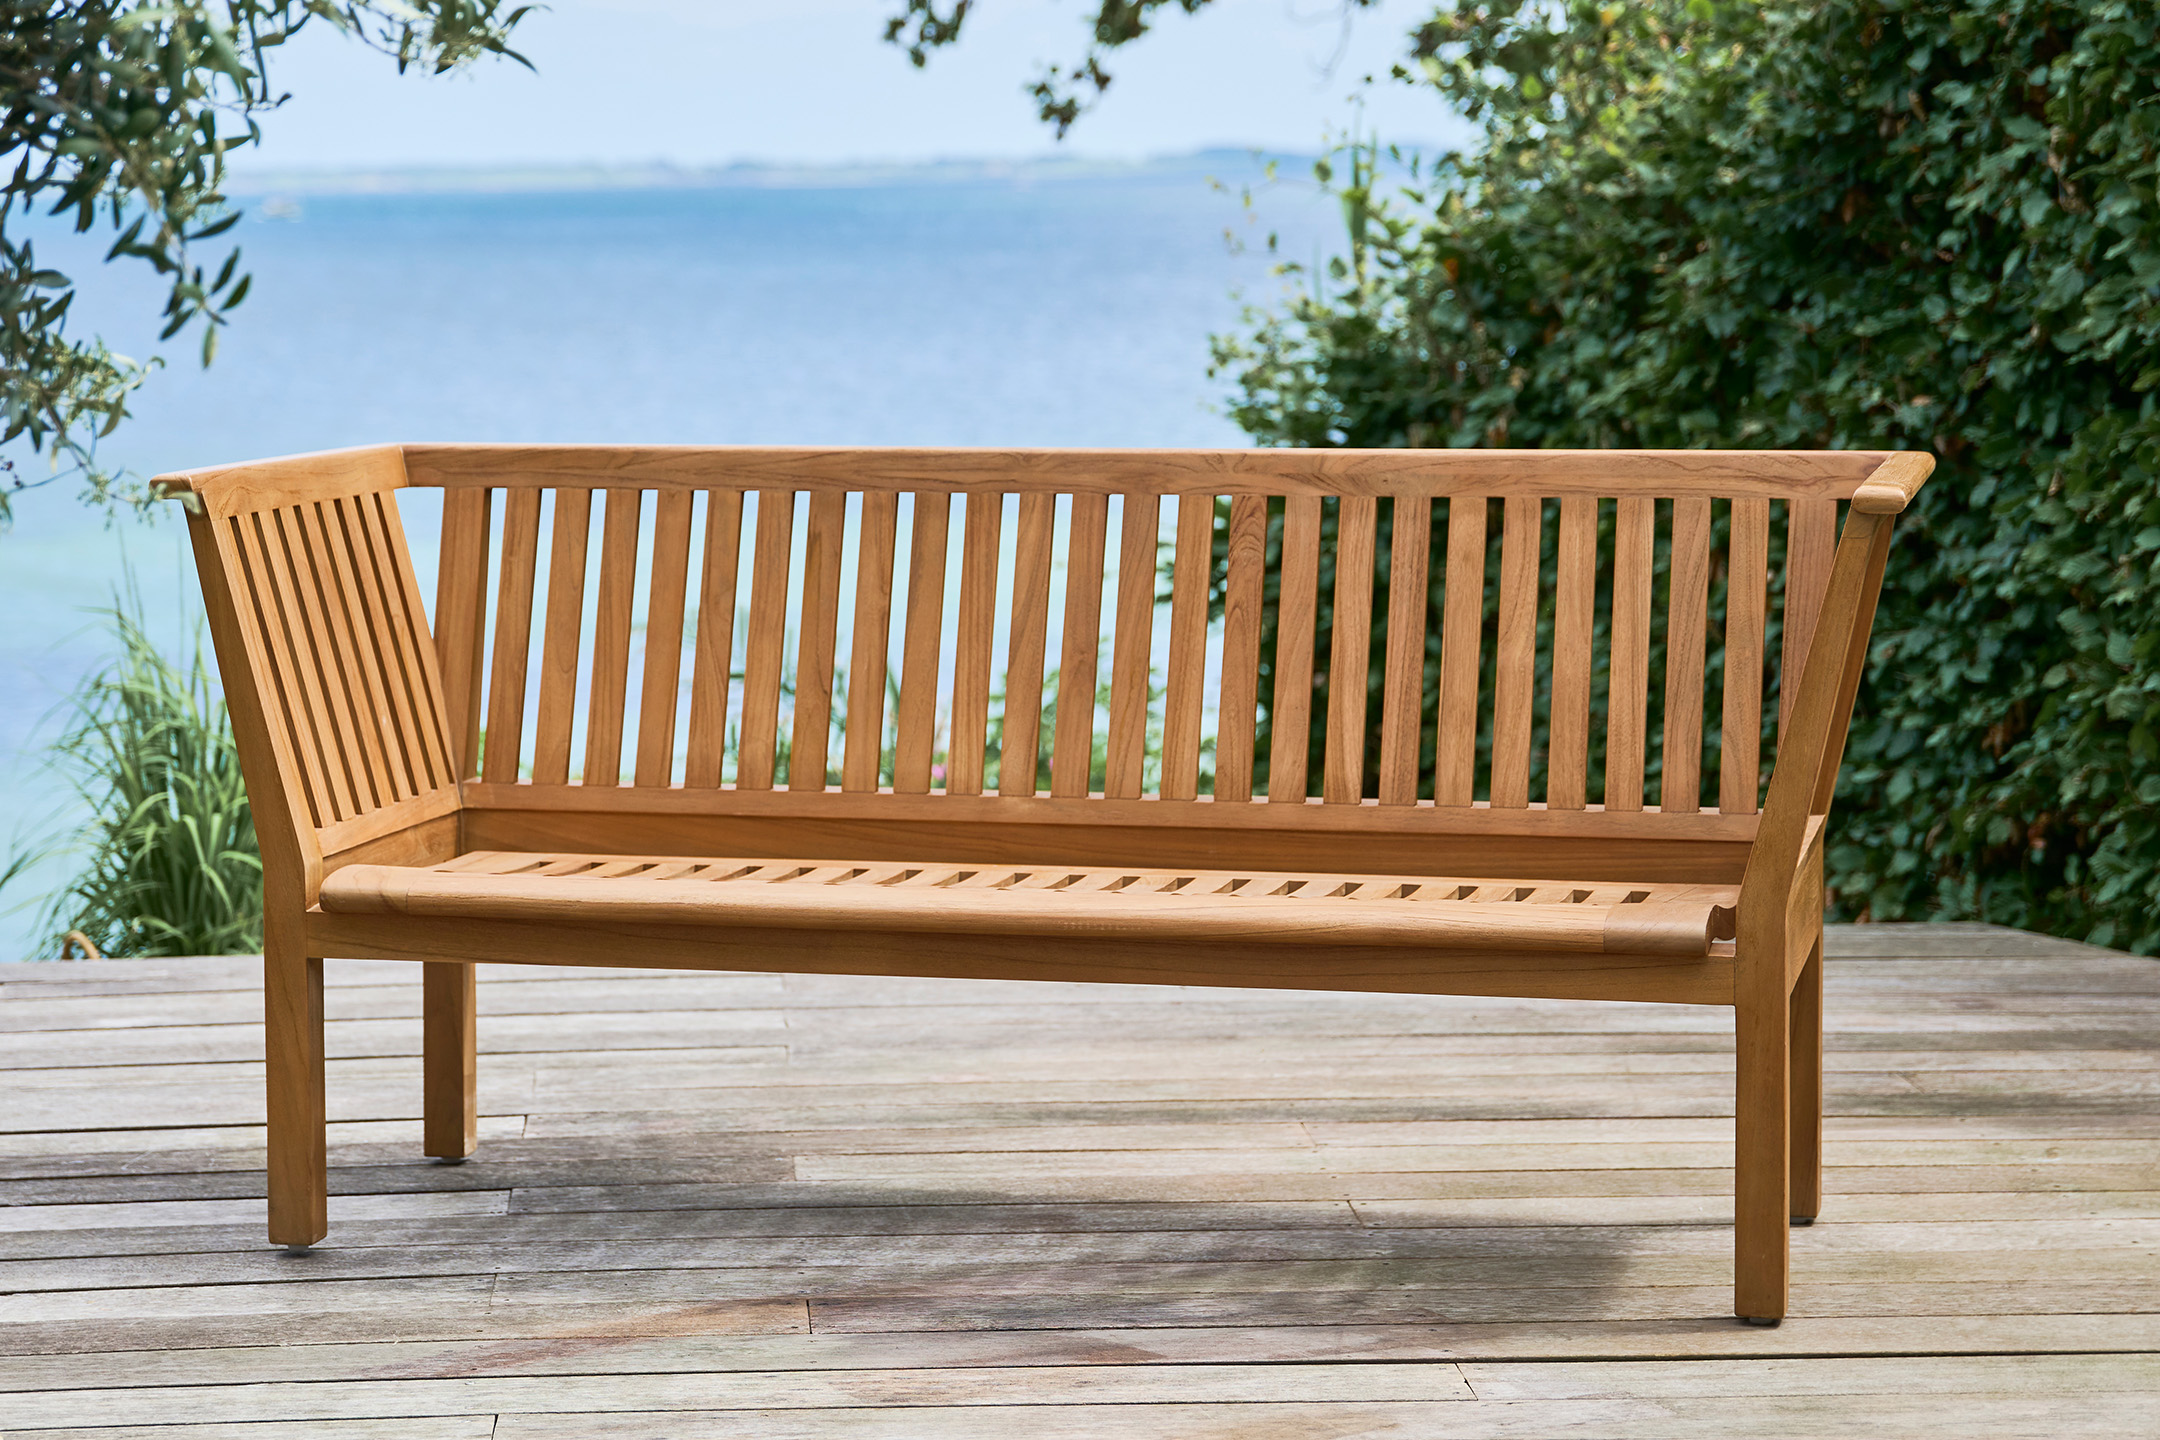 Introducing the St. Catherine Bench